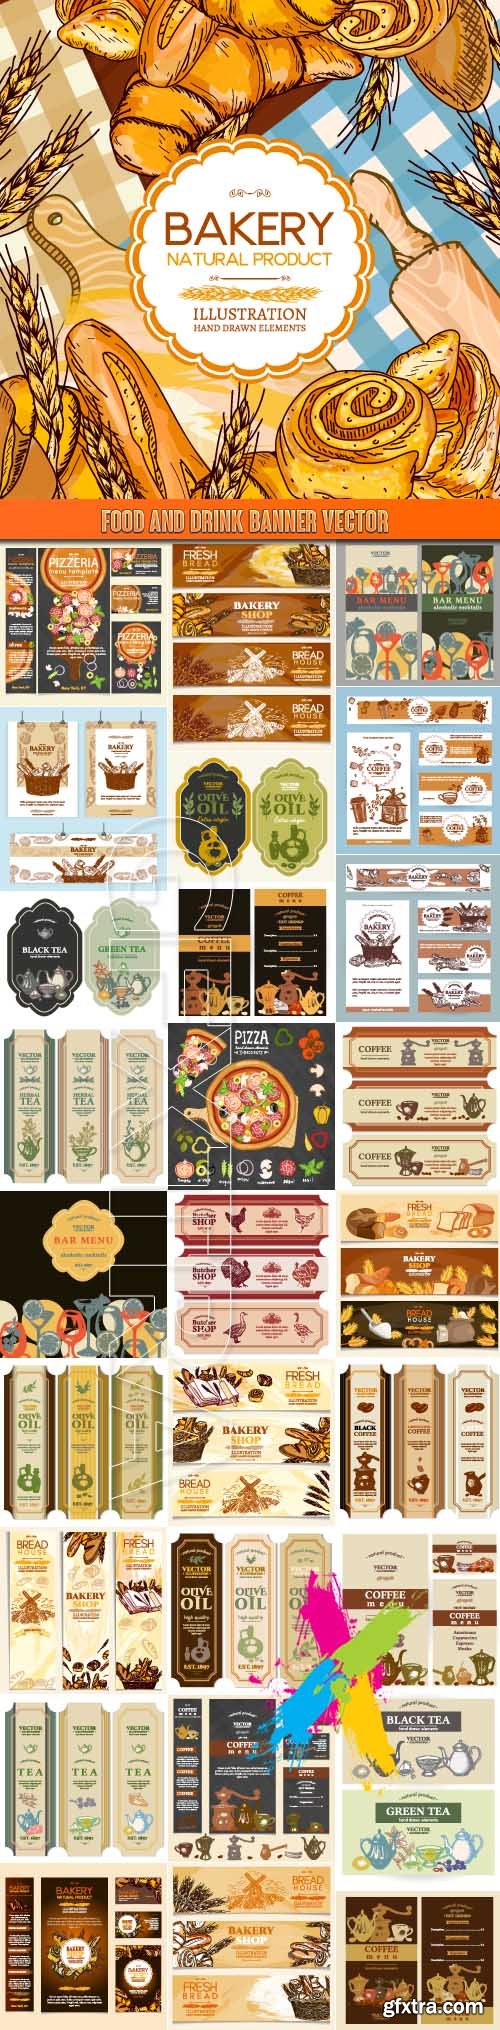 Food and Drink banner vector